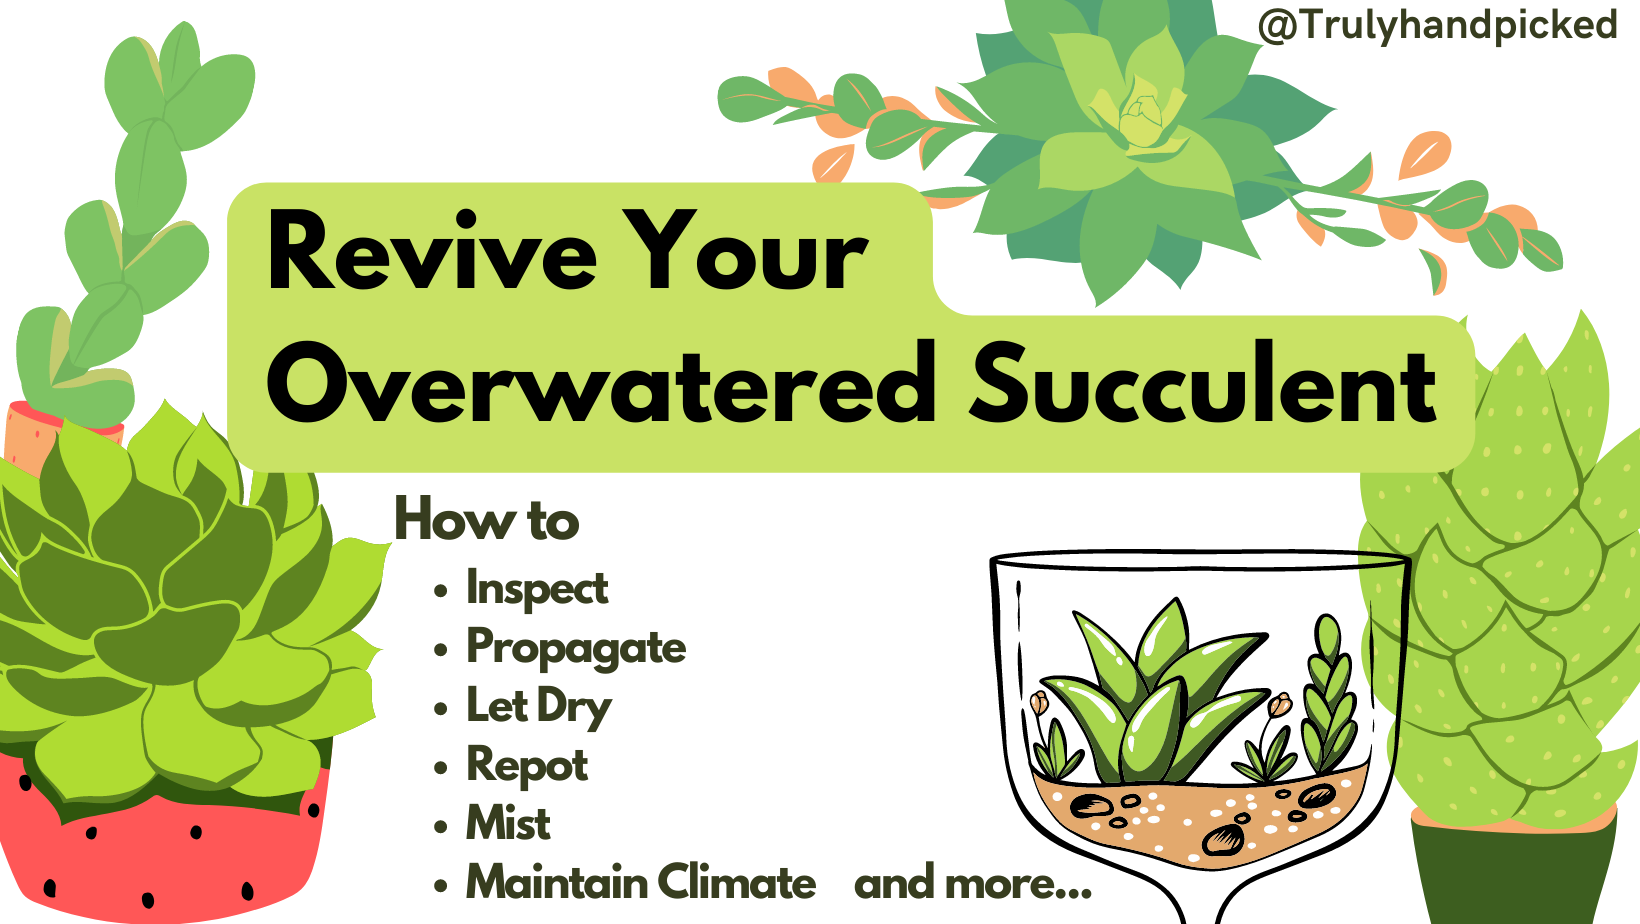 Steps to Revive your Over Watered Succulents